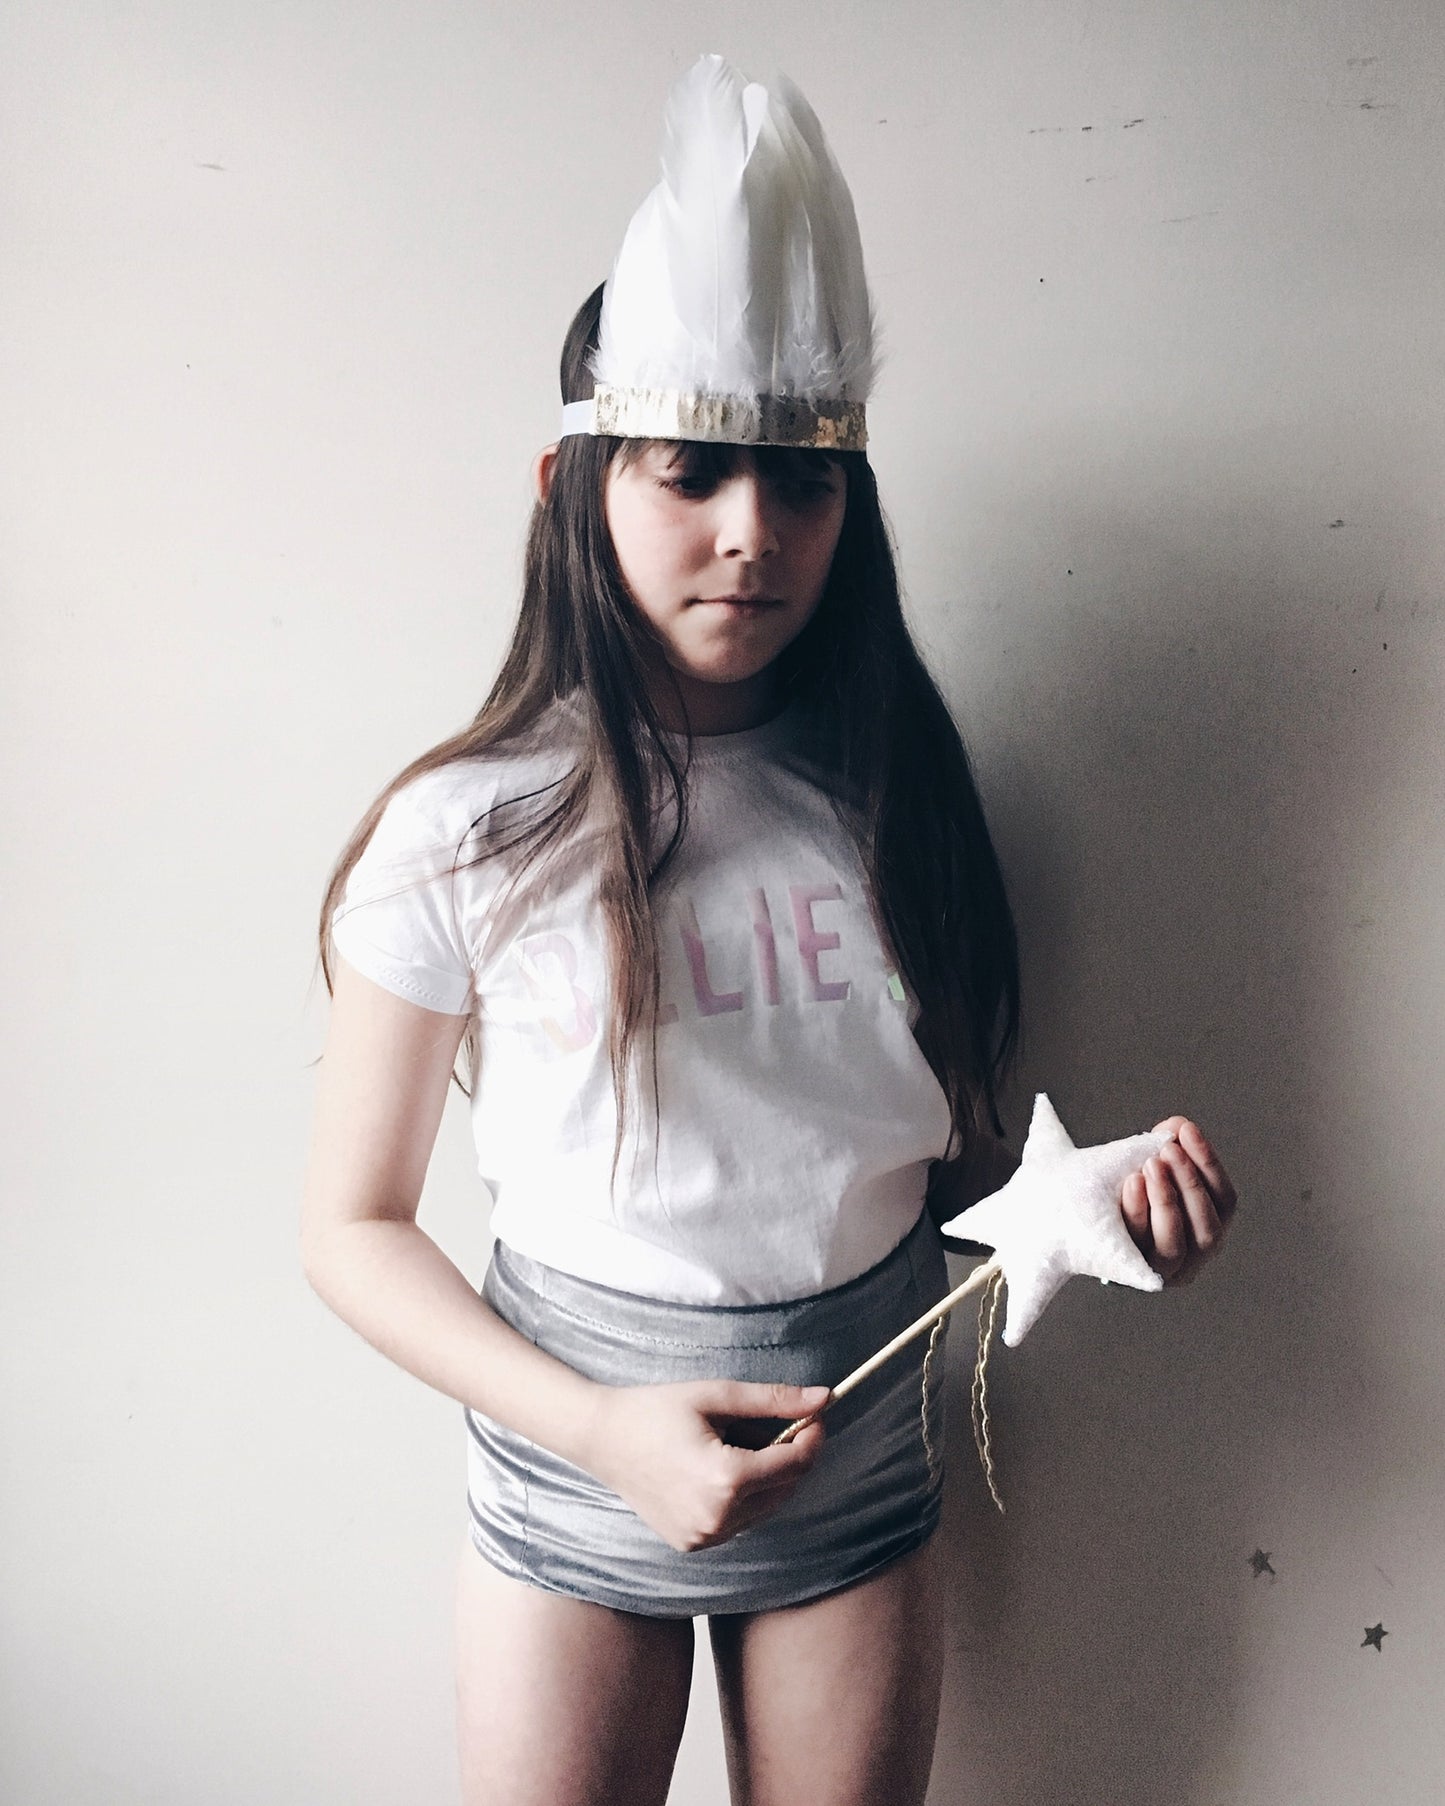 Girl stood against a white wall, holding a star wand and wearing a white feather headdress, believe t-shirt and grey velvet shorts